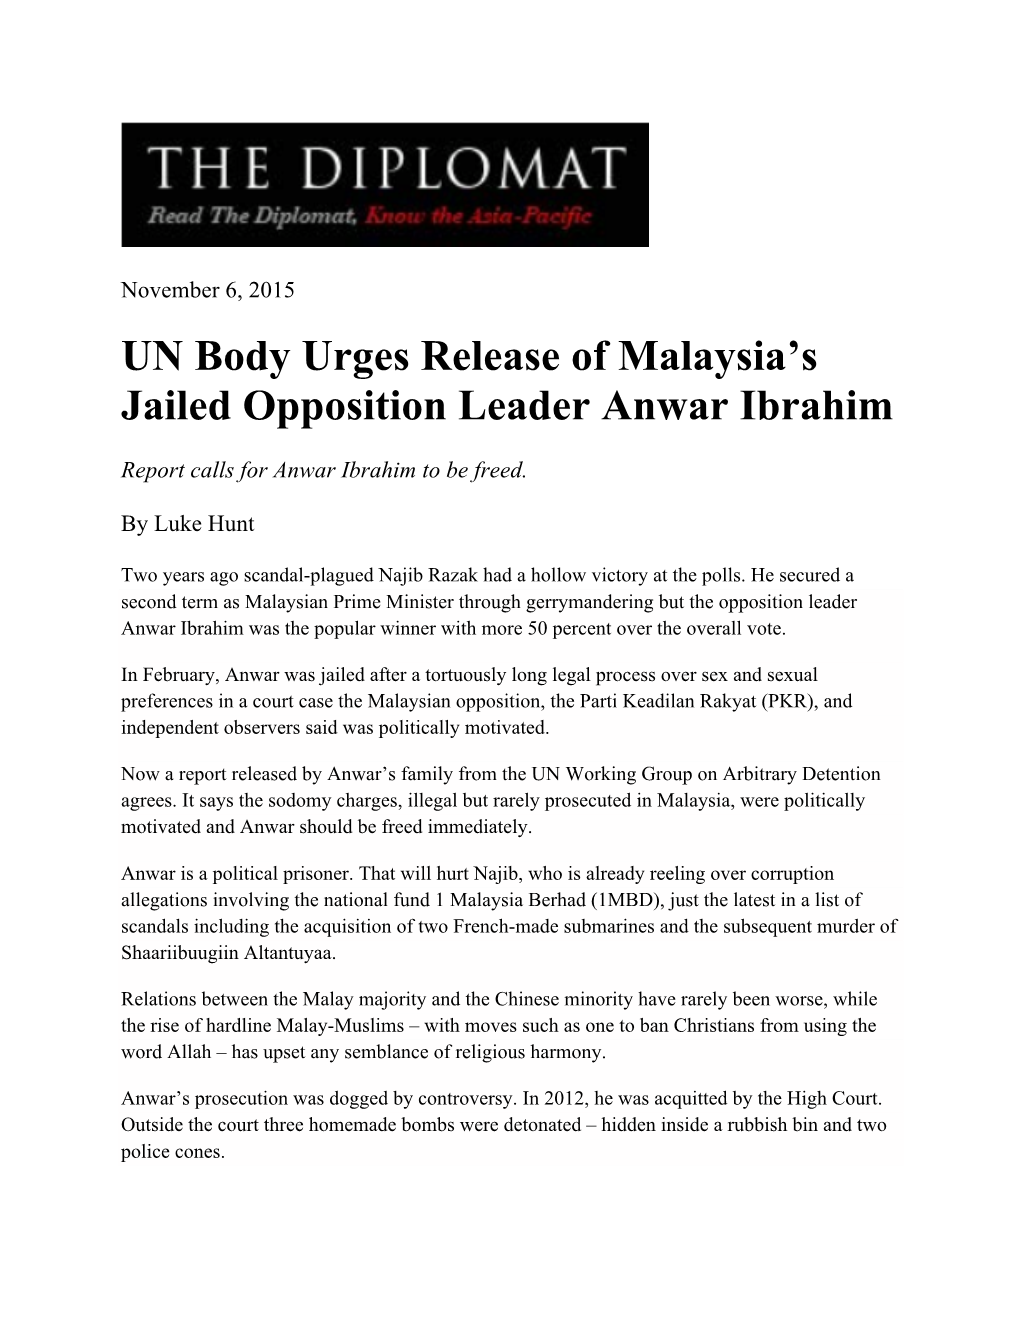 UN Body Urges Release of Malaysia's Jailed Opposition Leader Anwar